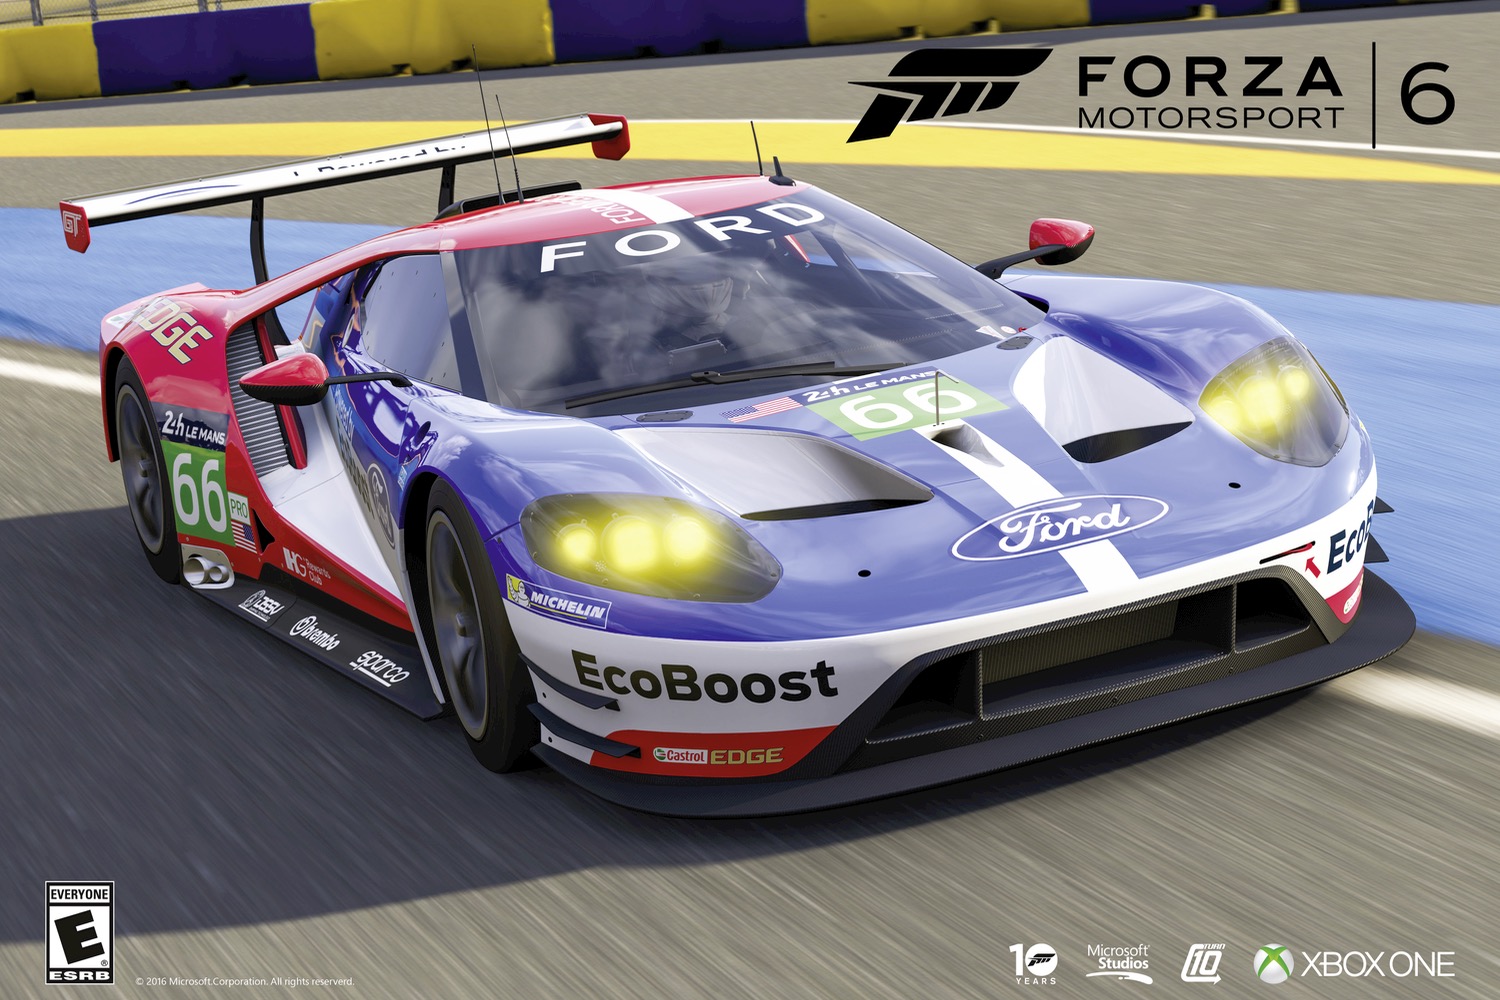 Forza Motorsport Review: 6 years in the making, here's what it's